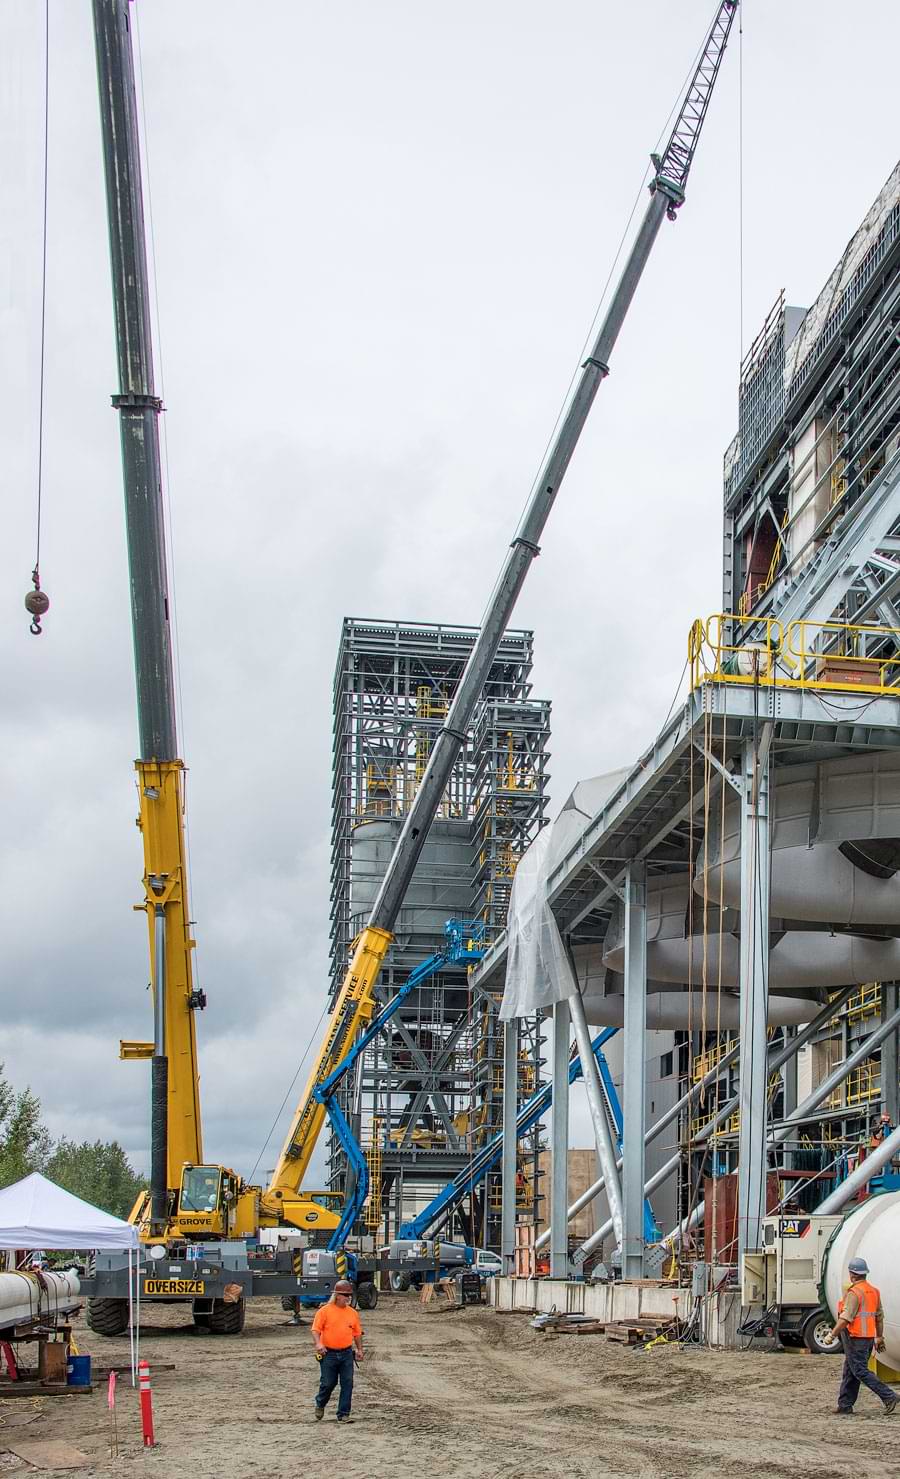 Davis Constructors and Engineers, Inc. completed the University of Alaska Fairbanks Combined Heat and Power Plant project in 2019